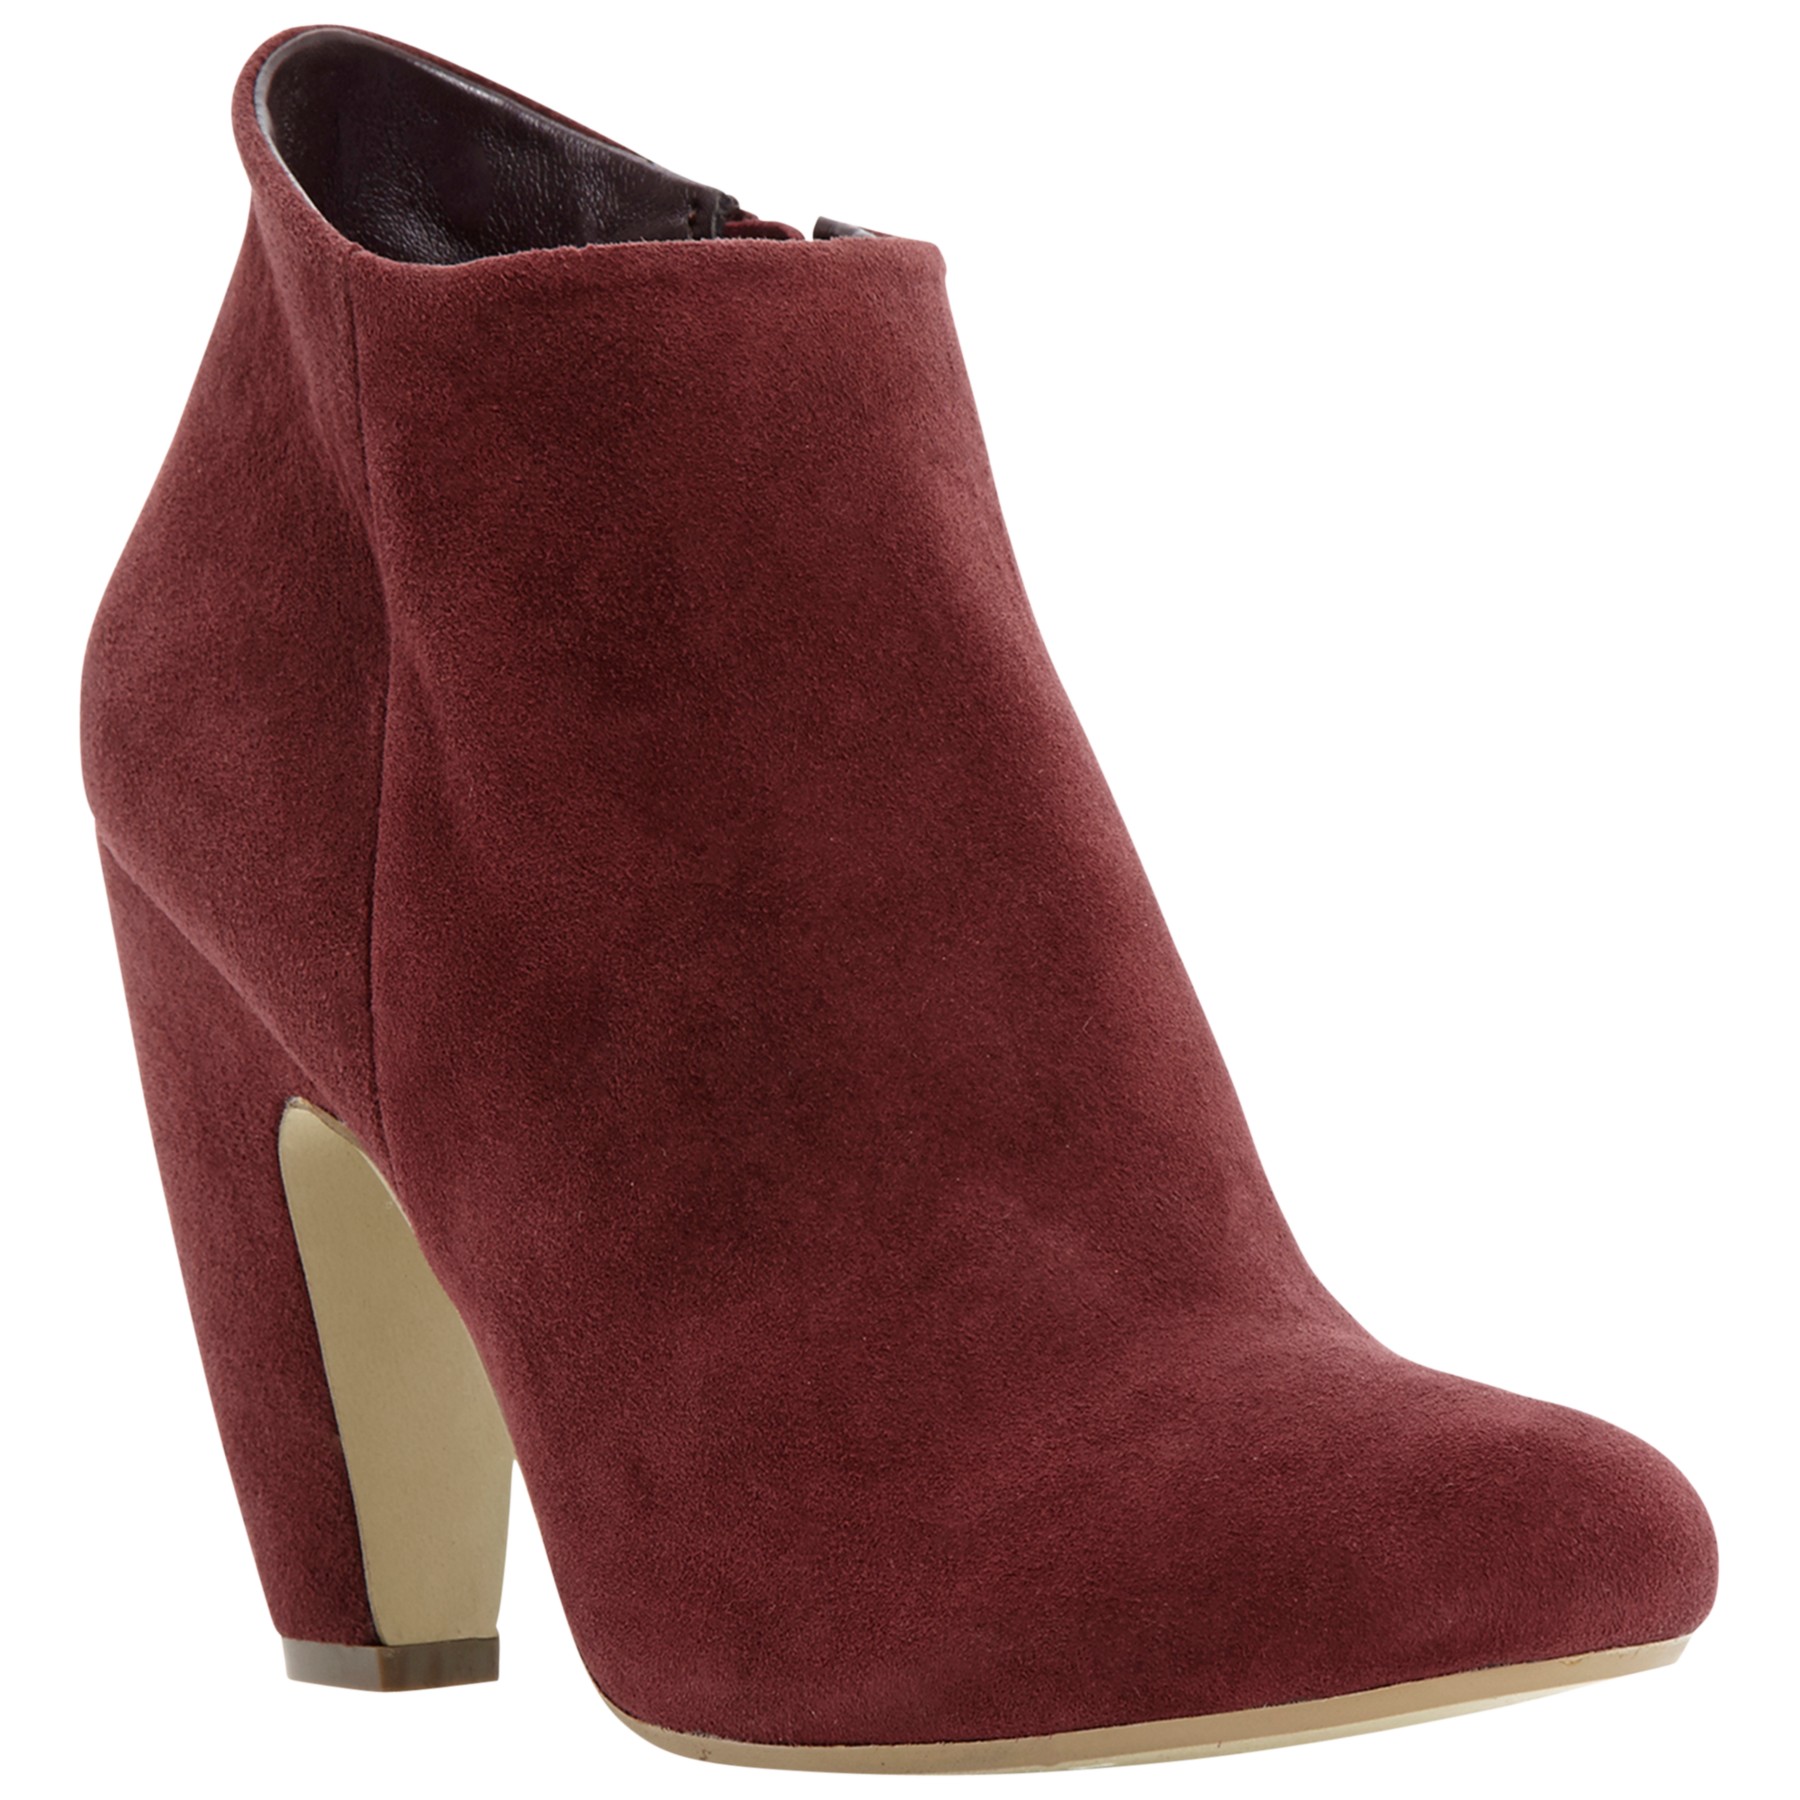 Steve Madden Panelope Suede Ankle Boots in Red (Burgundy) | Lyst